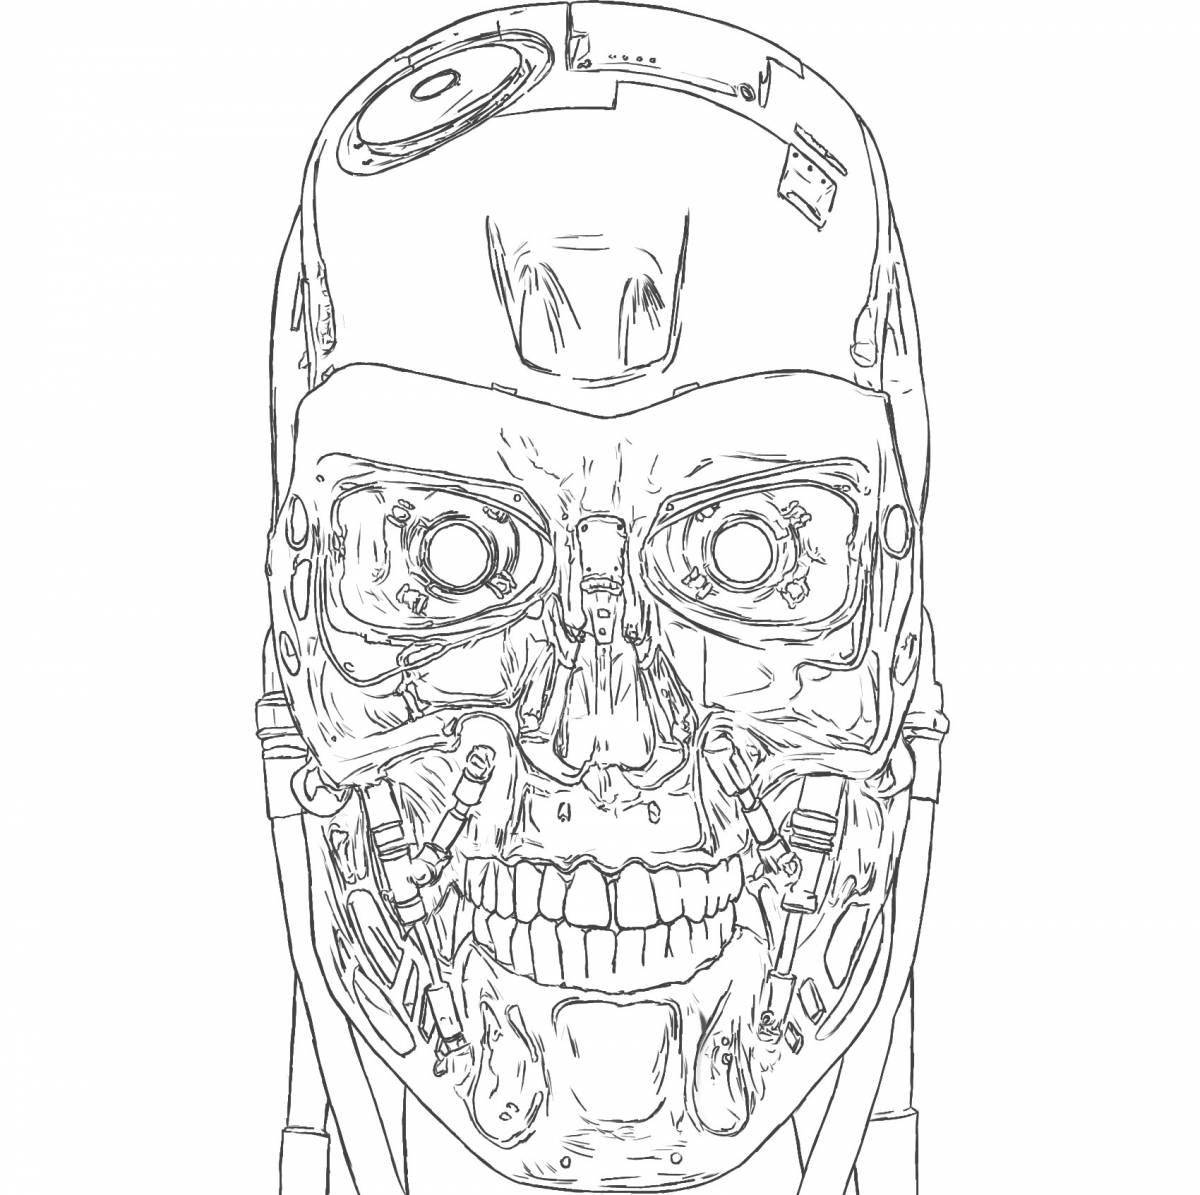 Amazing Terminator Coloring Page for Kids